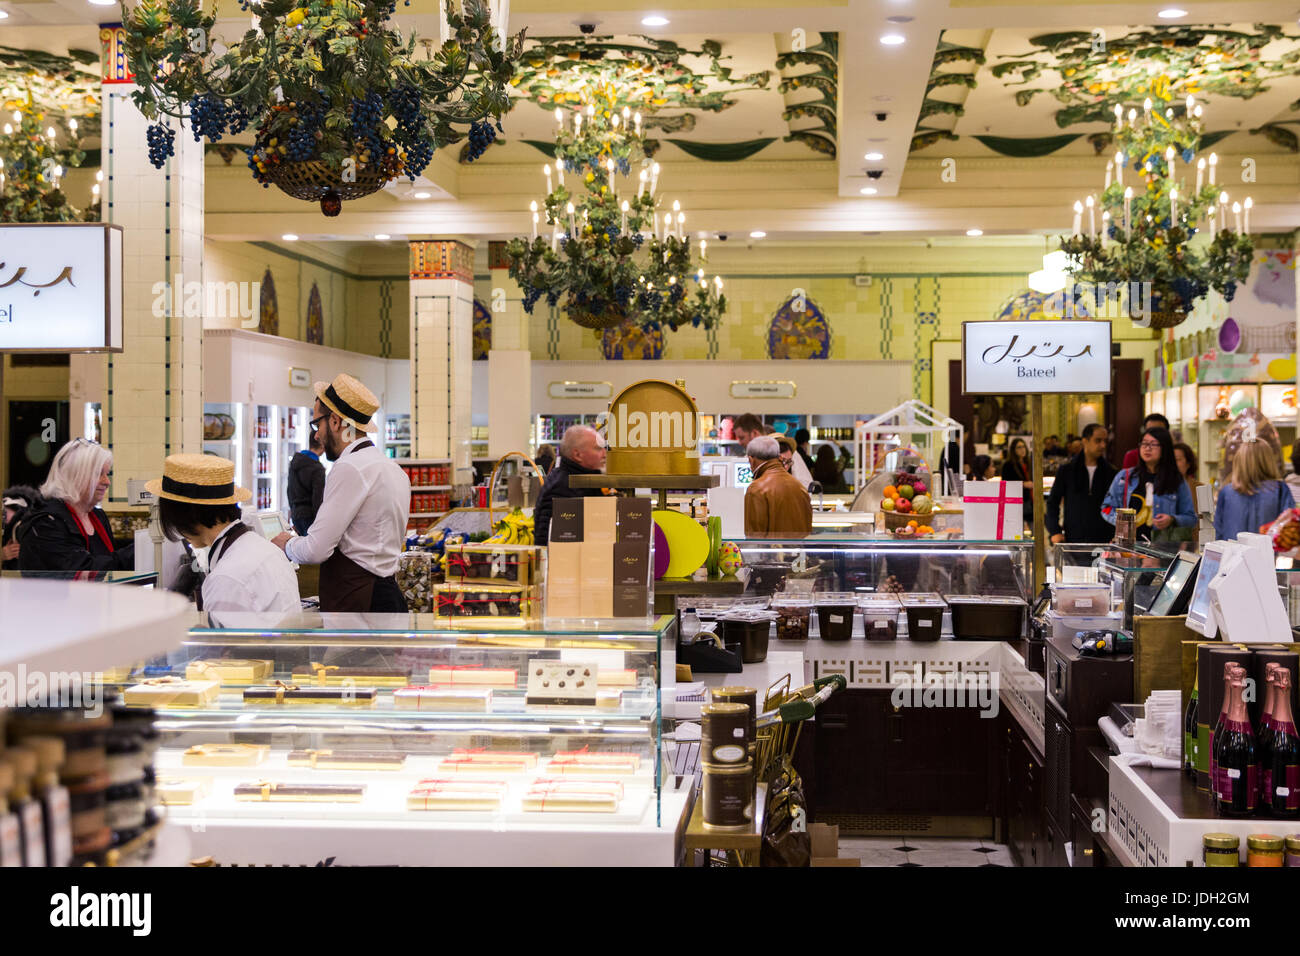 London, England - April 4, 2017: Harrods department store interior, candies  and sweets area. Harrods is the biggest department store in Europe, London  Stock Photo - Alamy